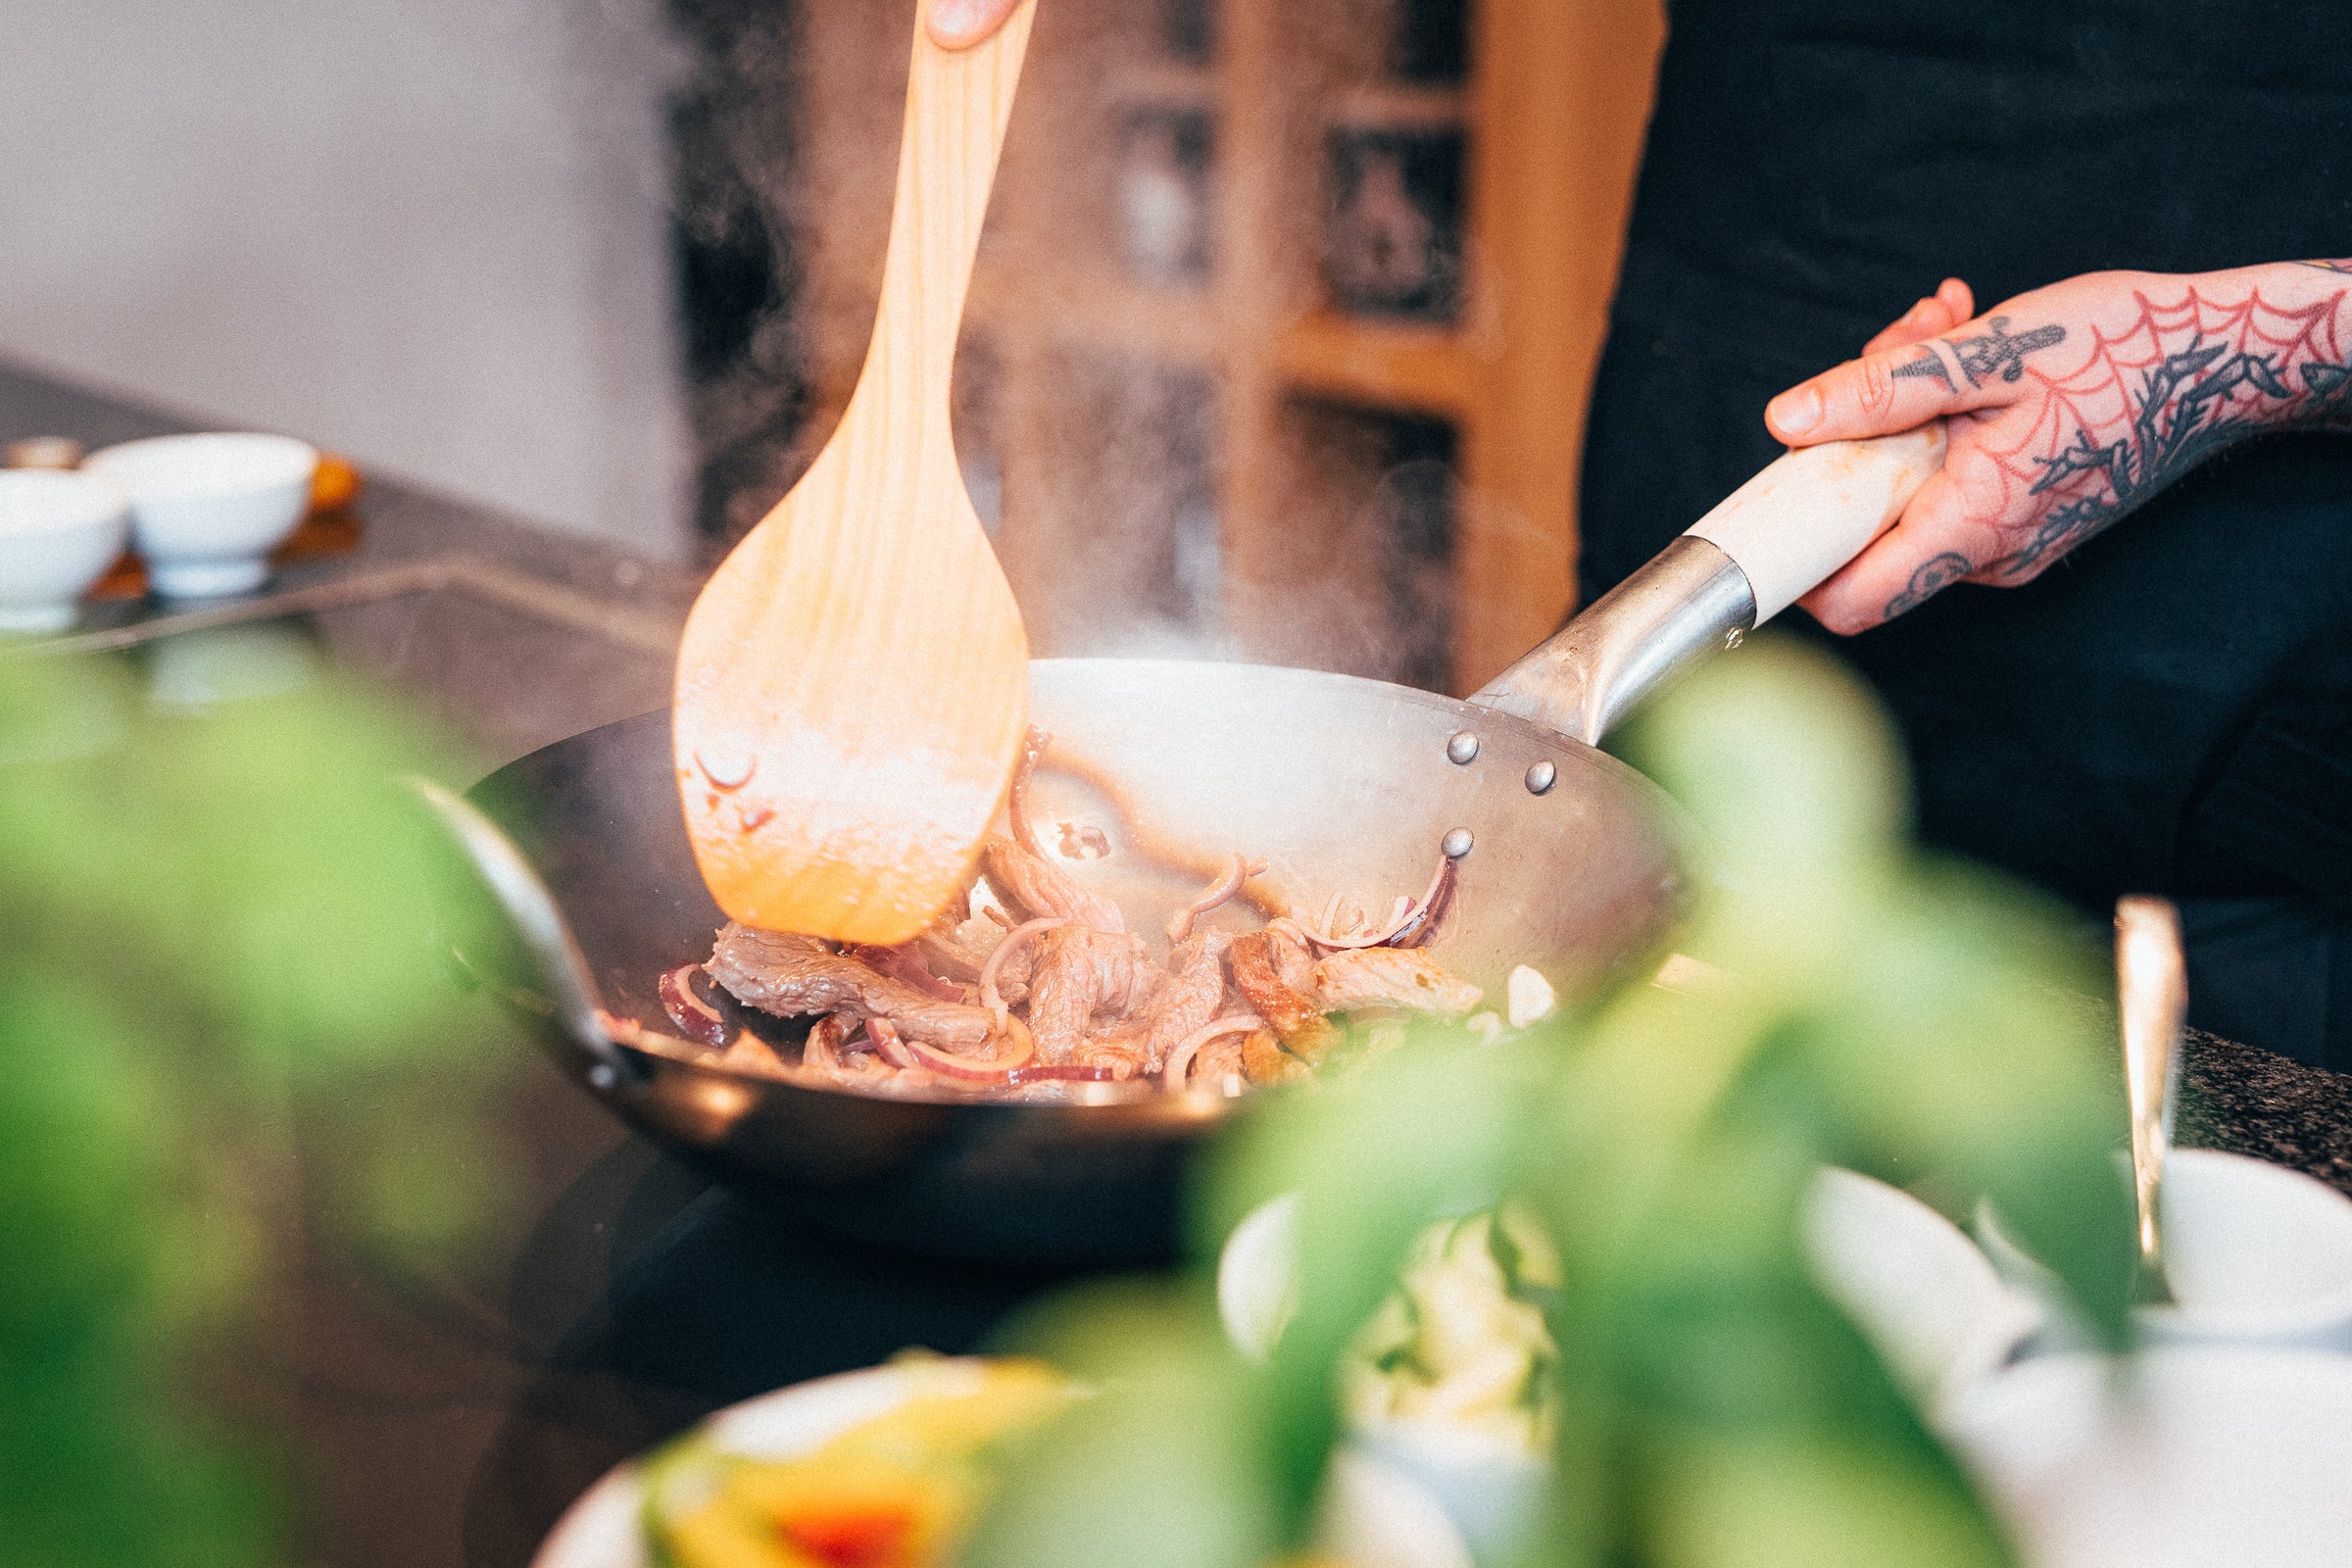 Our professional chef Mane sautés strips with onions in our traditionally hand-hammered pasoli flat-bottomed wok, using our cherry-wood pasoli wok spatula.